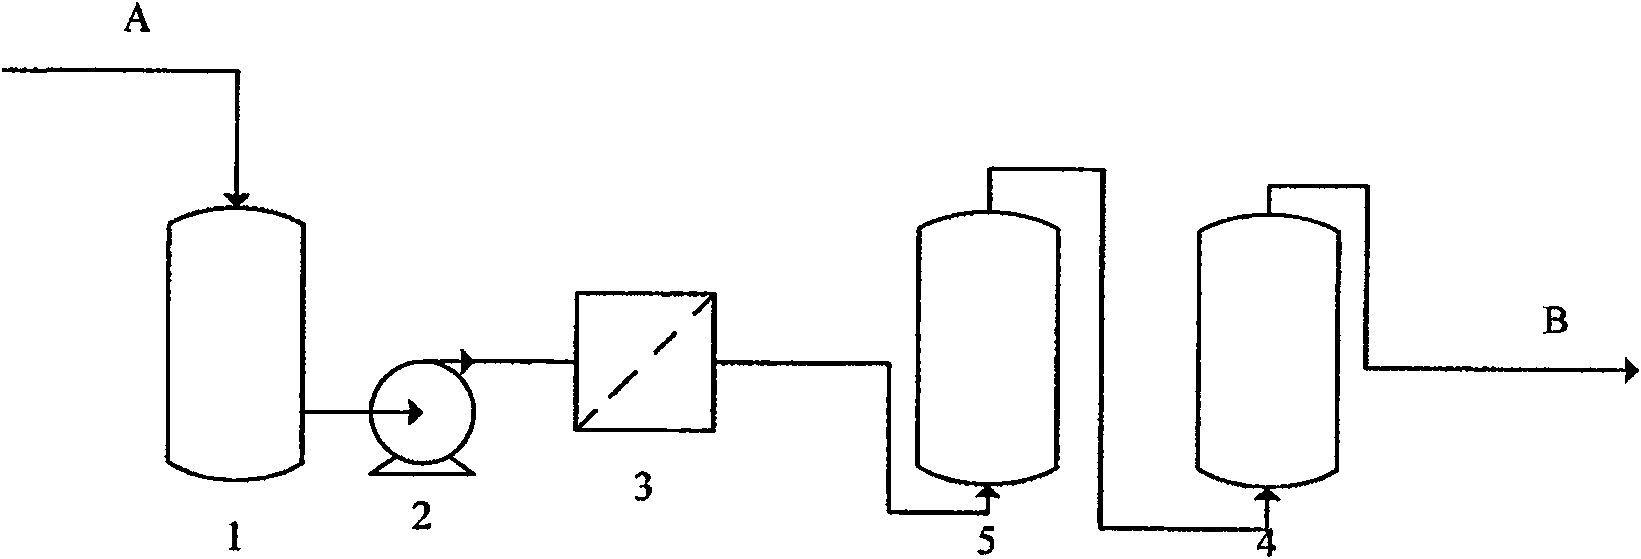 Method for processing high temperature condensed water by integration technique of membrane